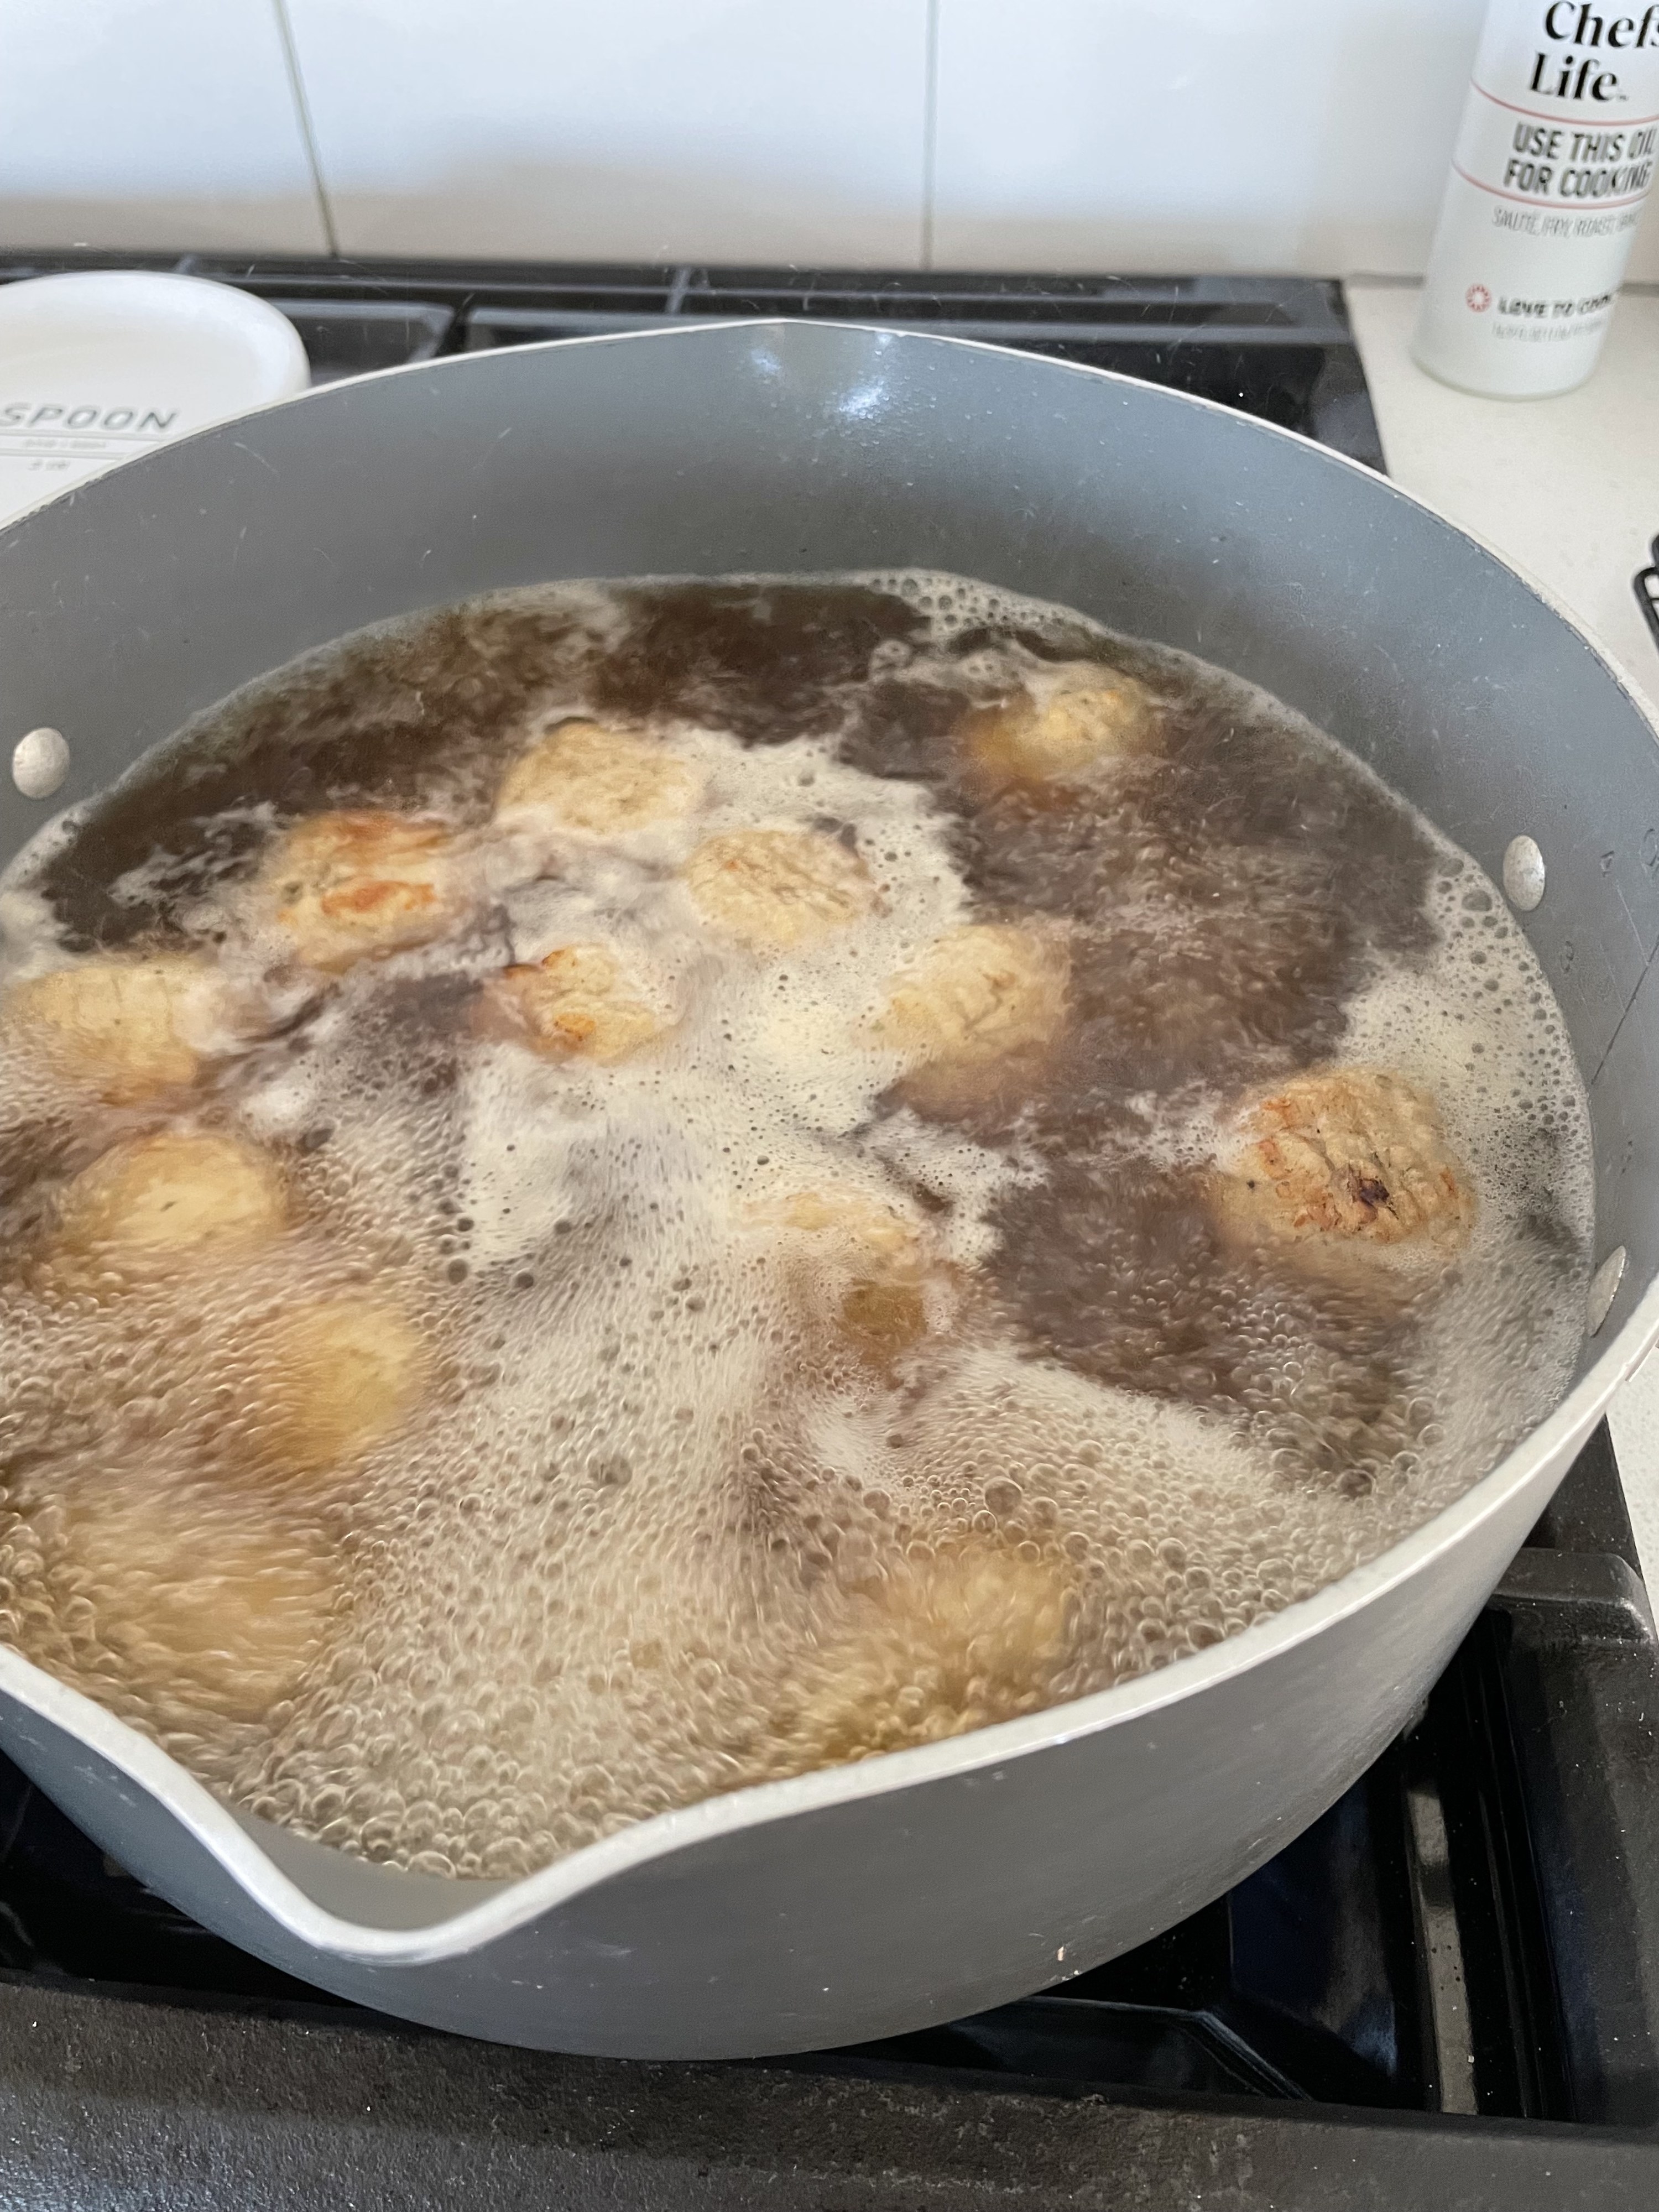 meatballs cooking in a pot